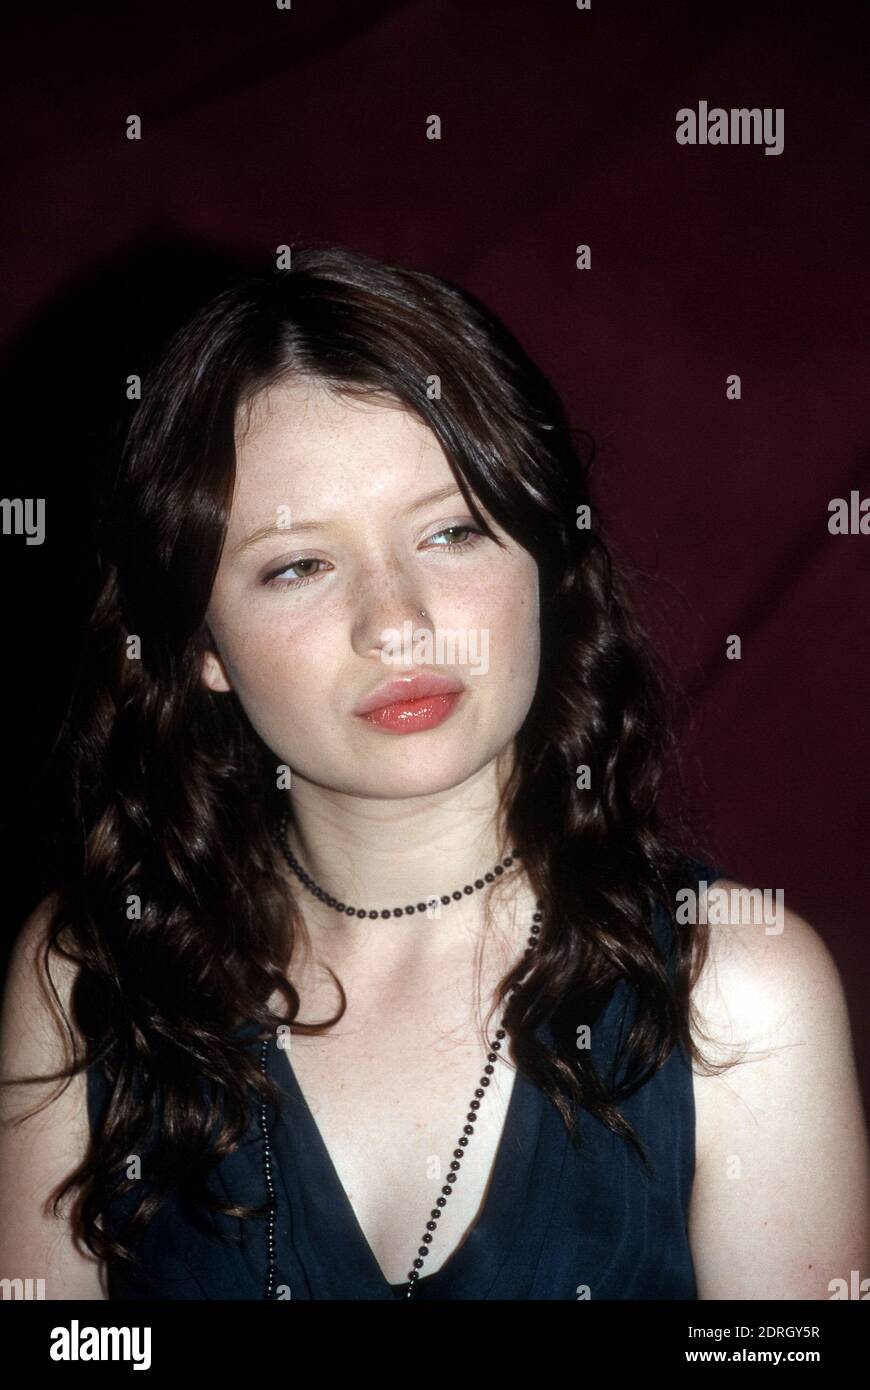 Star of 'Lemony Snicket's A Series of Unfortunate Events,' Emily Browning, circa 2004 / File Reference # 34000-1536PLTHA Stock Photo